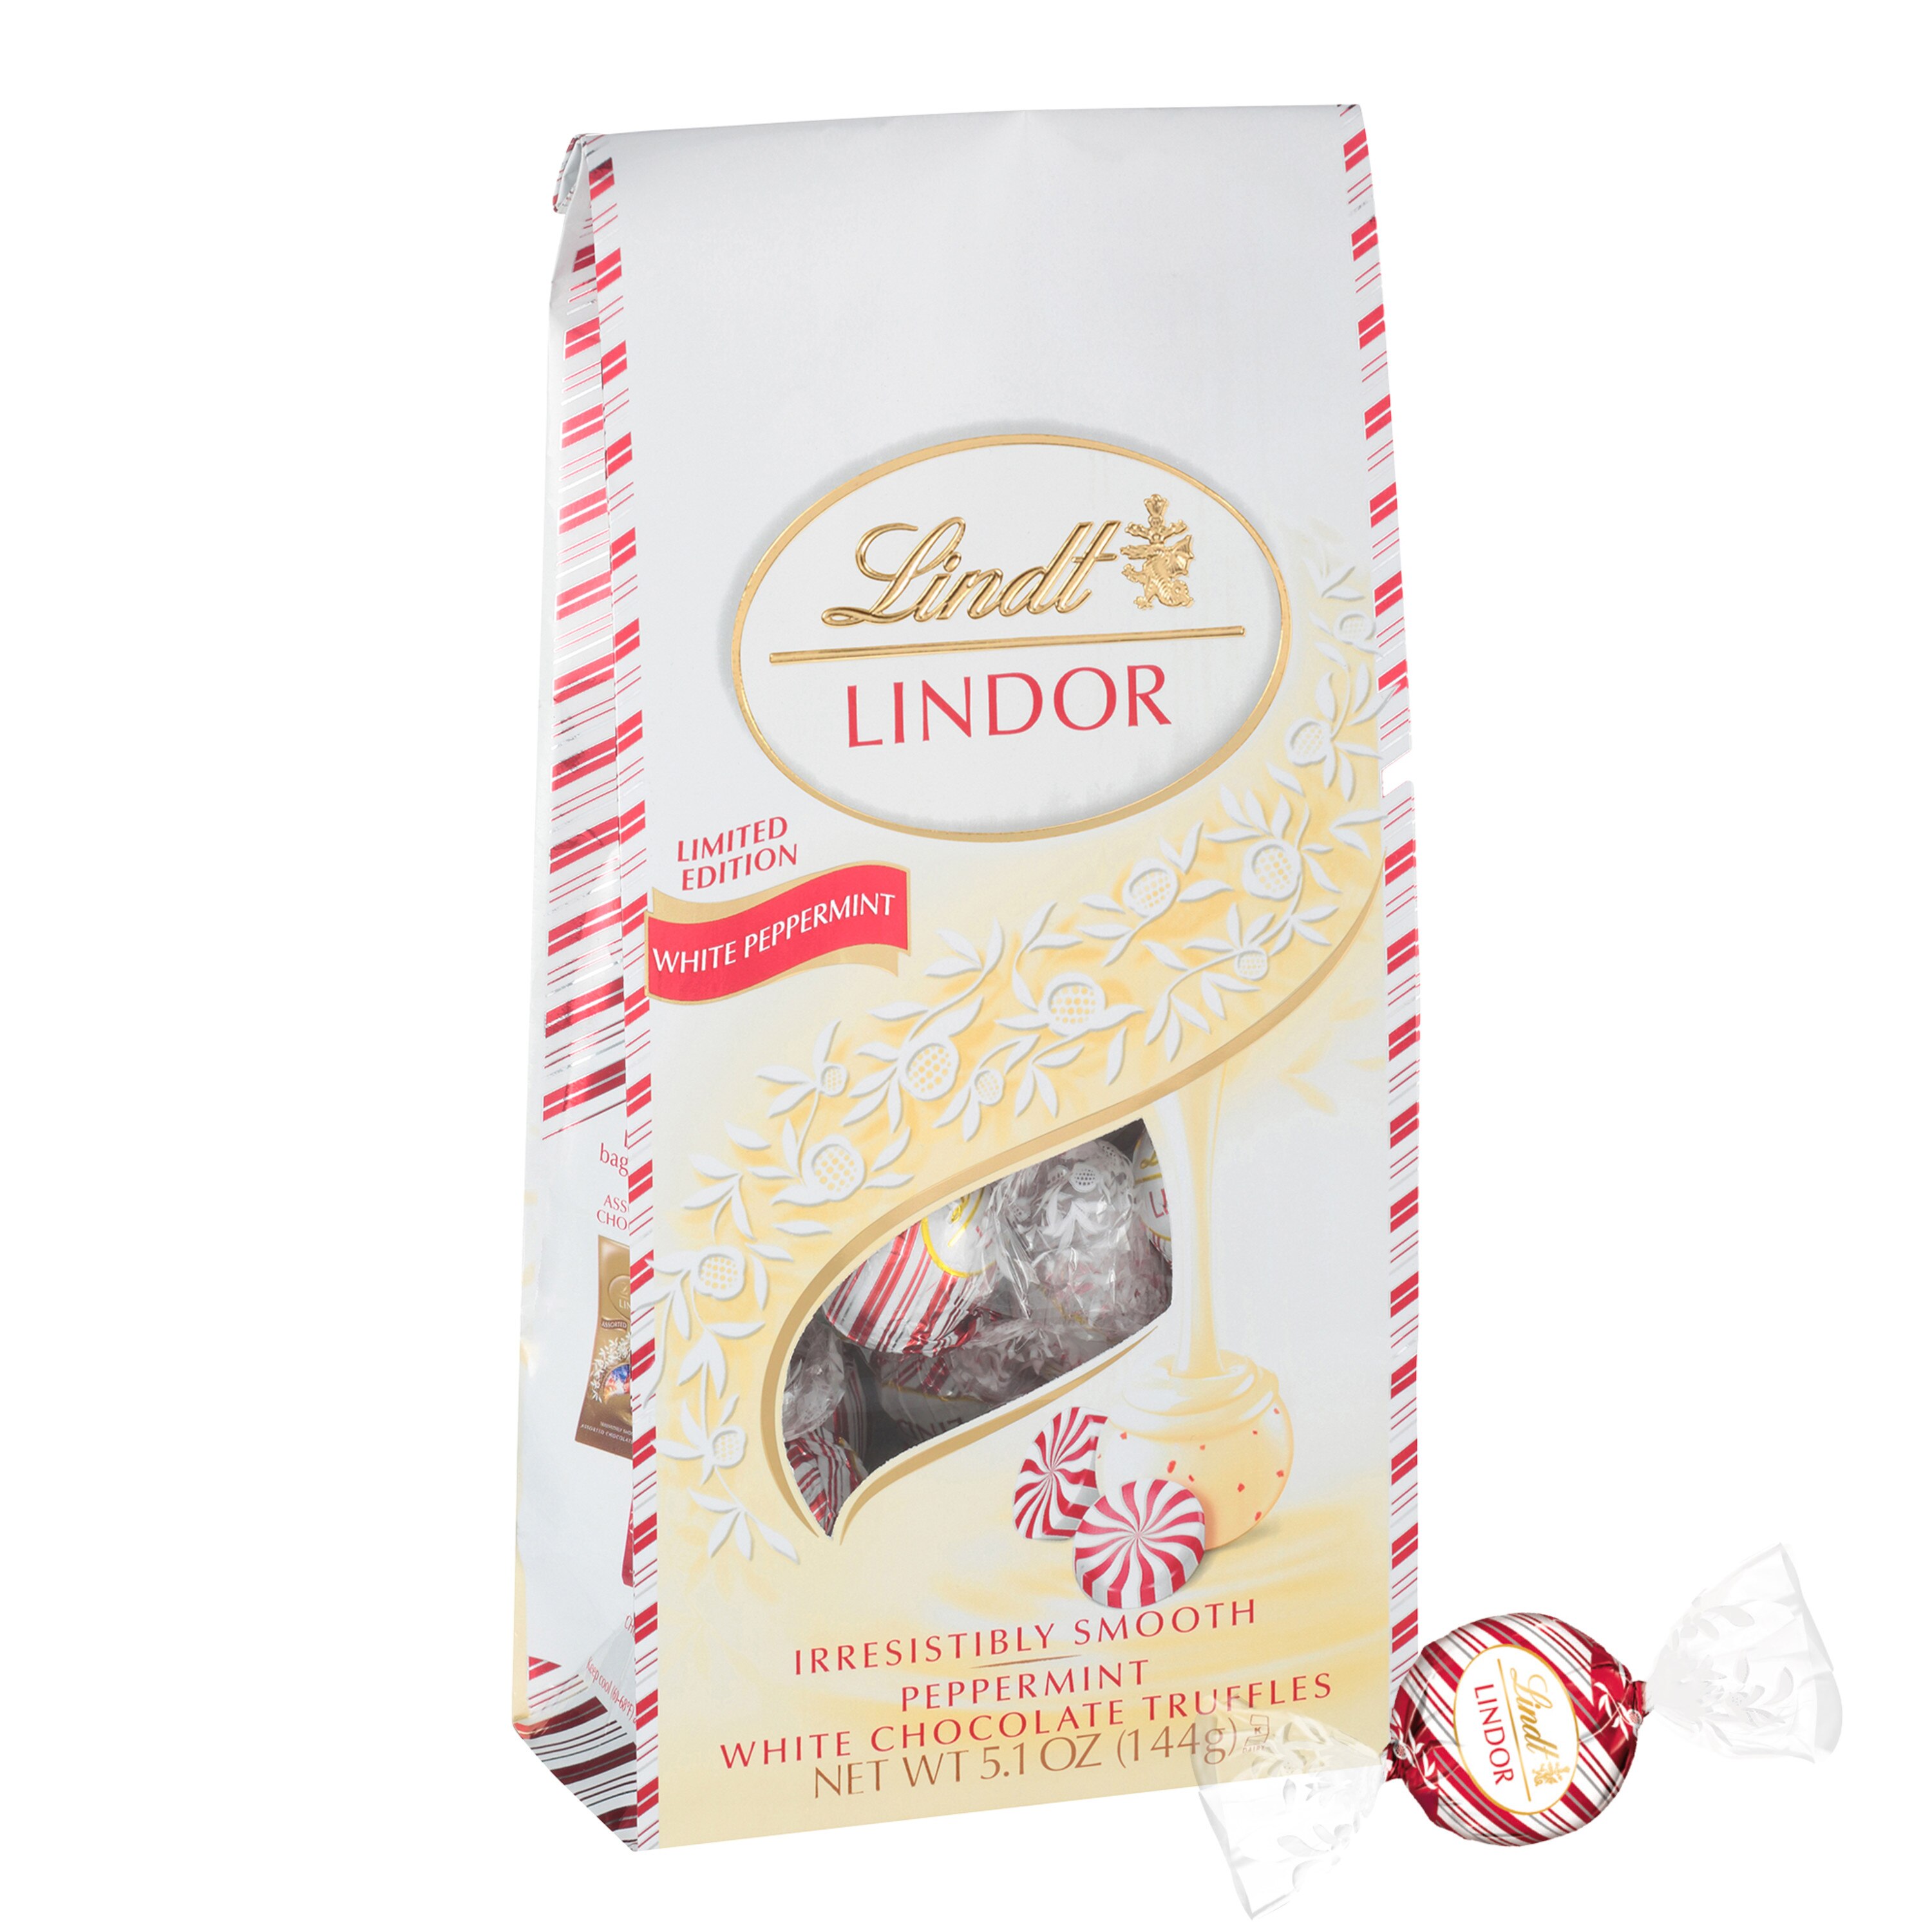 Lindt LINDOR White Chocolate Peppermint Truffles with Smooth Peppermint Truffle Center, 5.1 oz. Bag